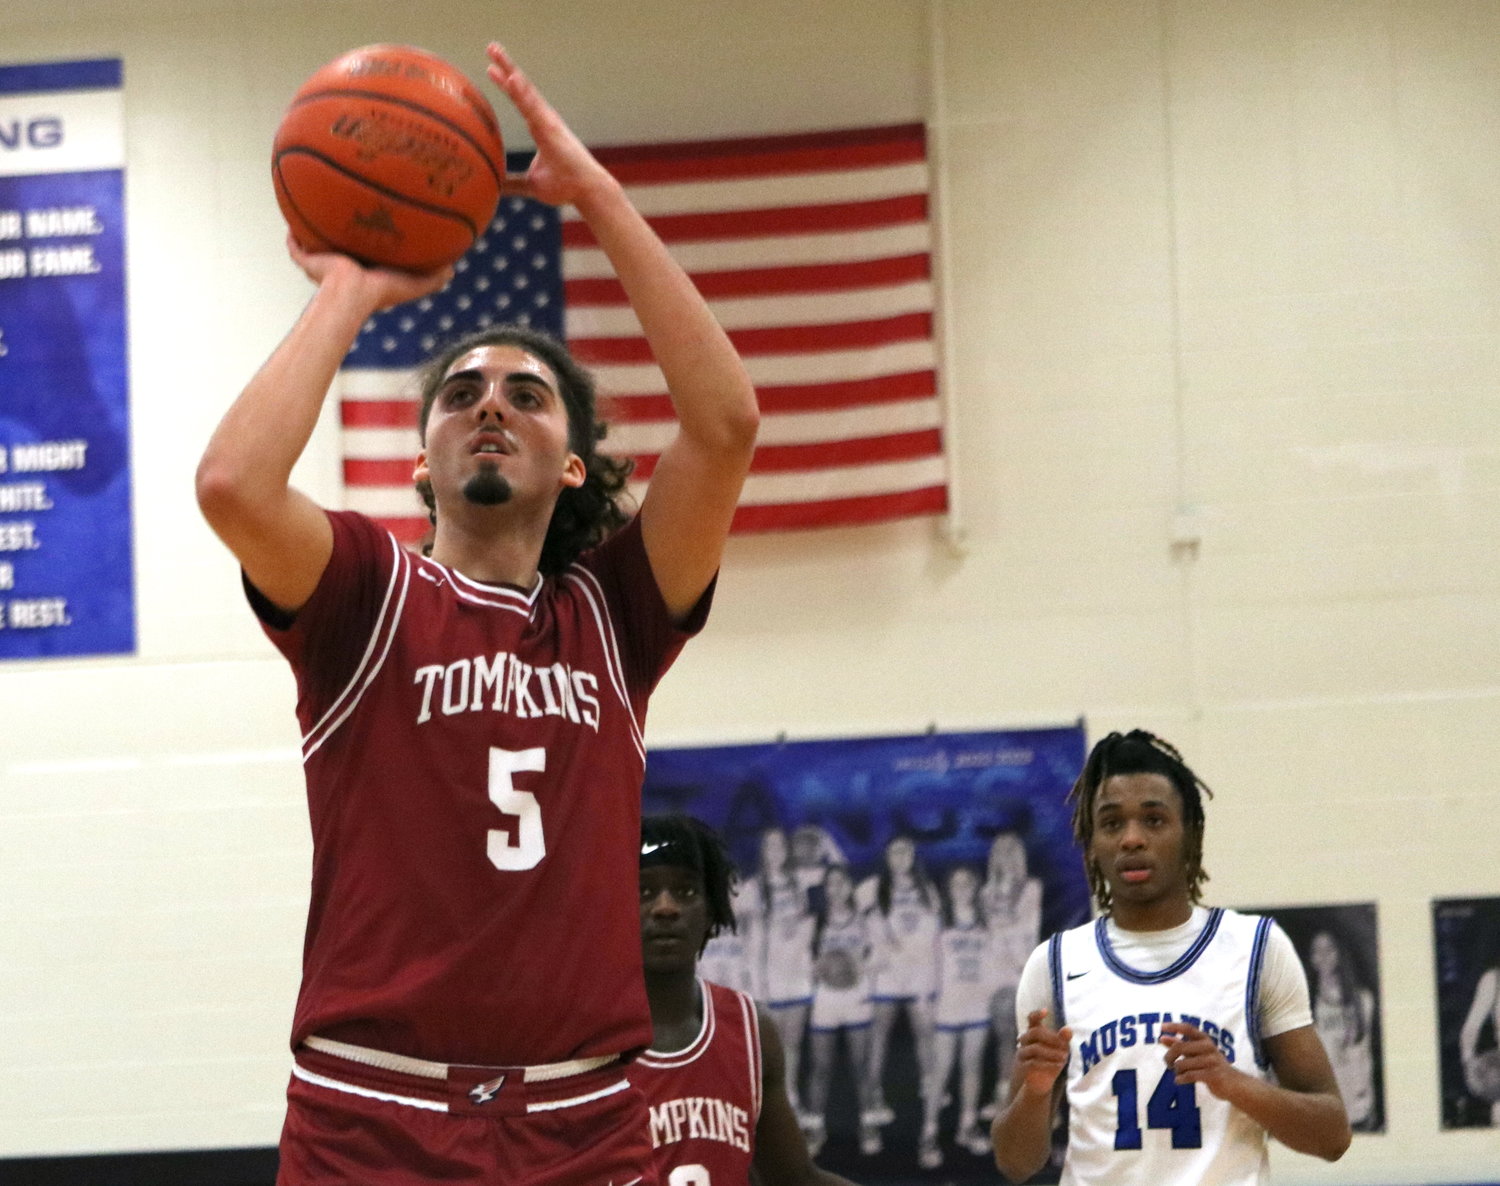 Luke Caughran shoots a free throw during Saturday's game between Tompkins and Taylor at the Taylor gym.